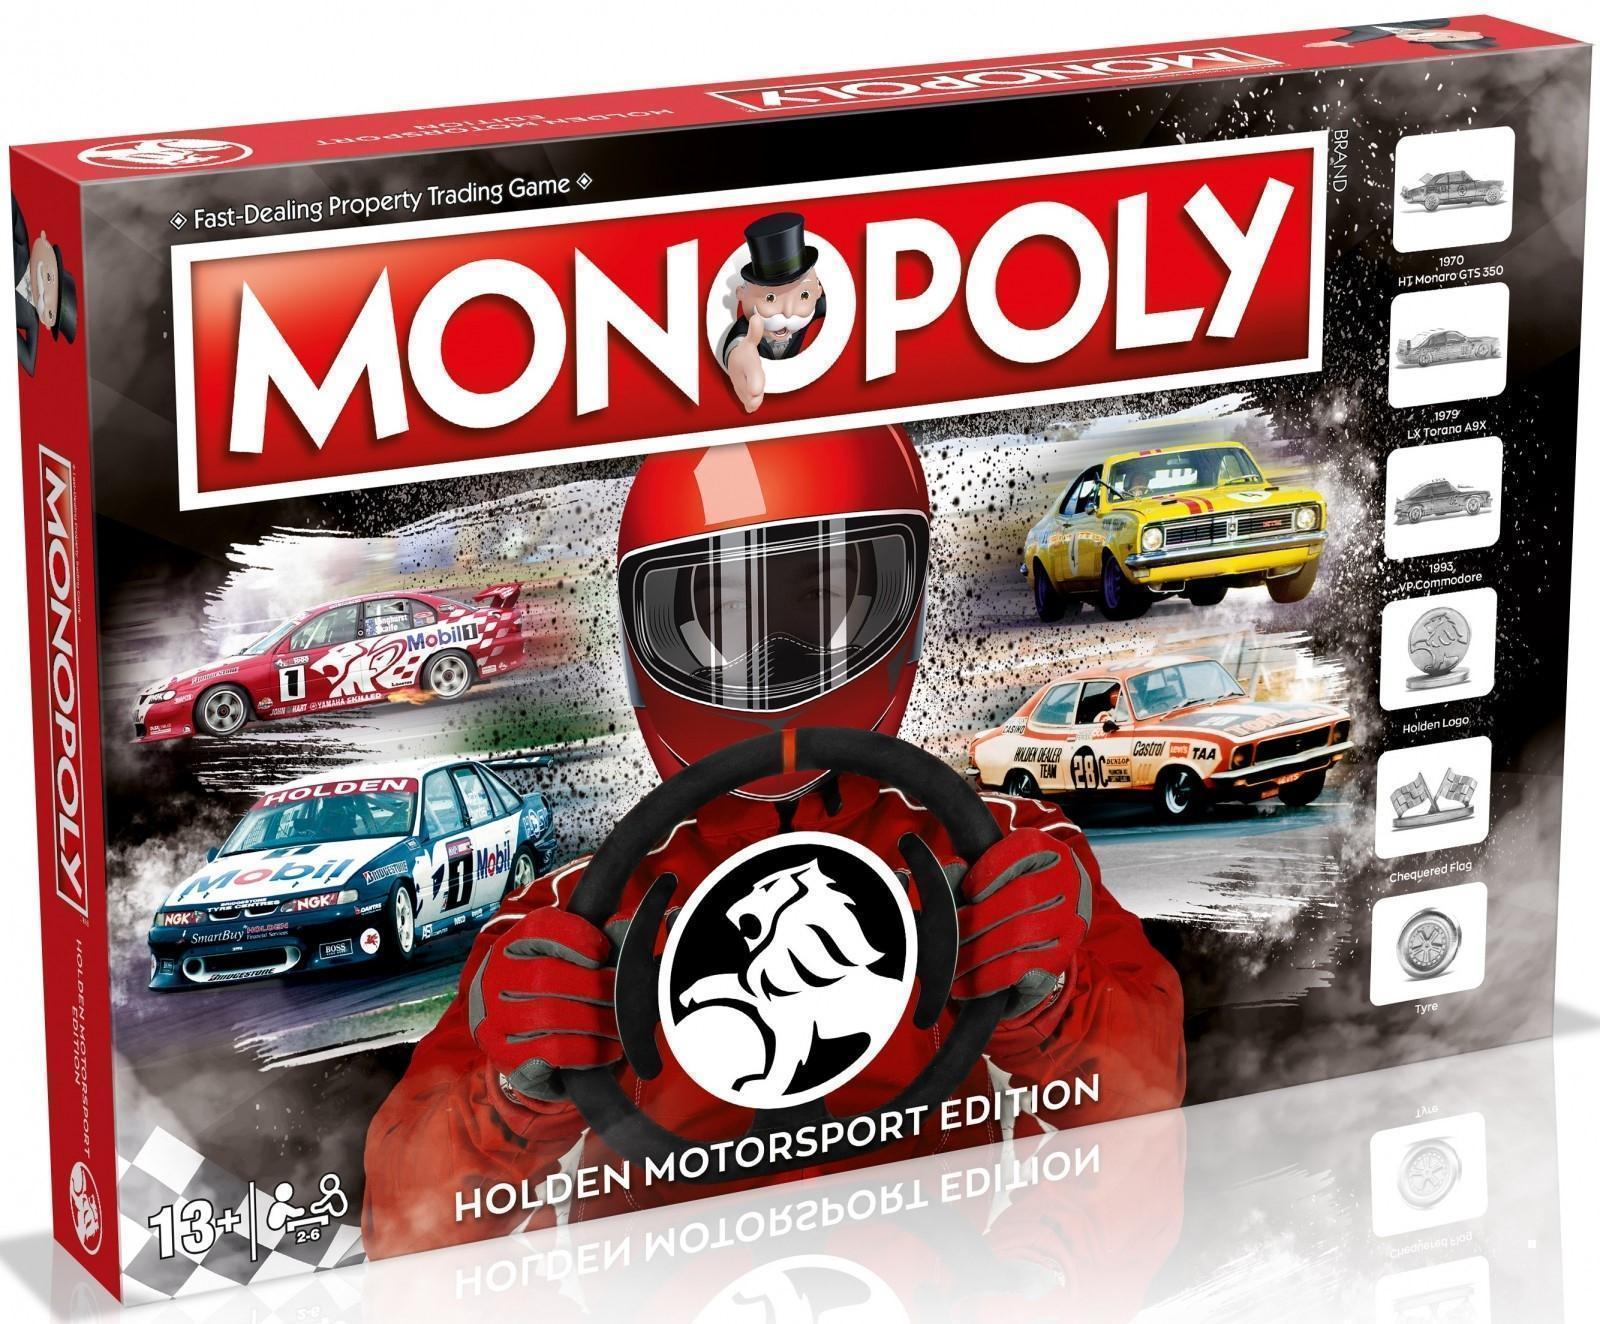 Holden Motorsport Edition Monopoly The Fast Dealing Property Trading Board Game